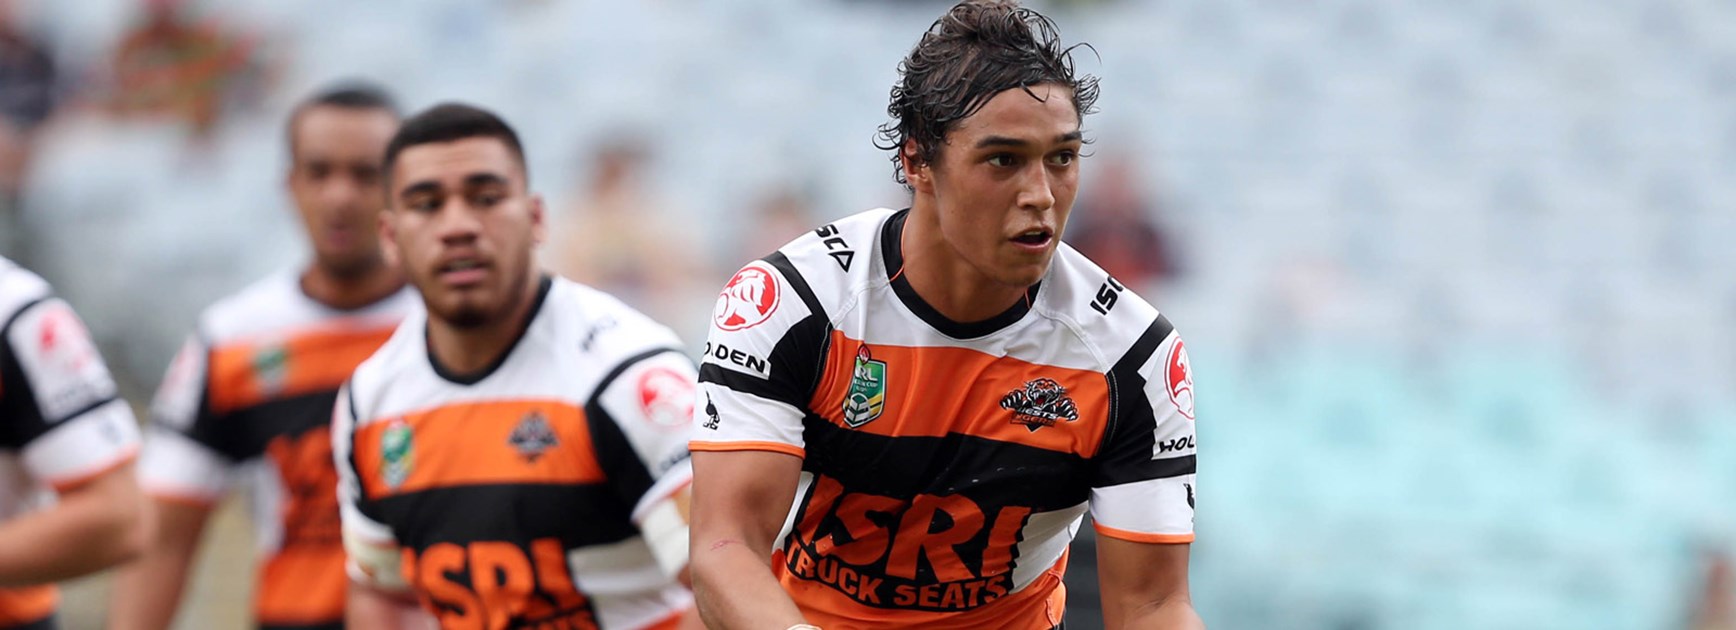 Penrith have announced the signing of young Kiwi playmaker Te Maire Martin on a three-year deal.